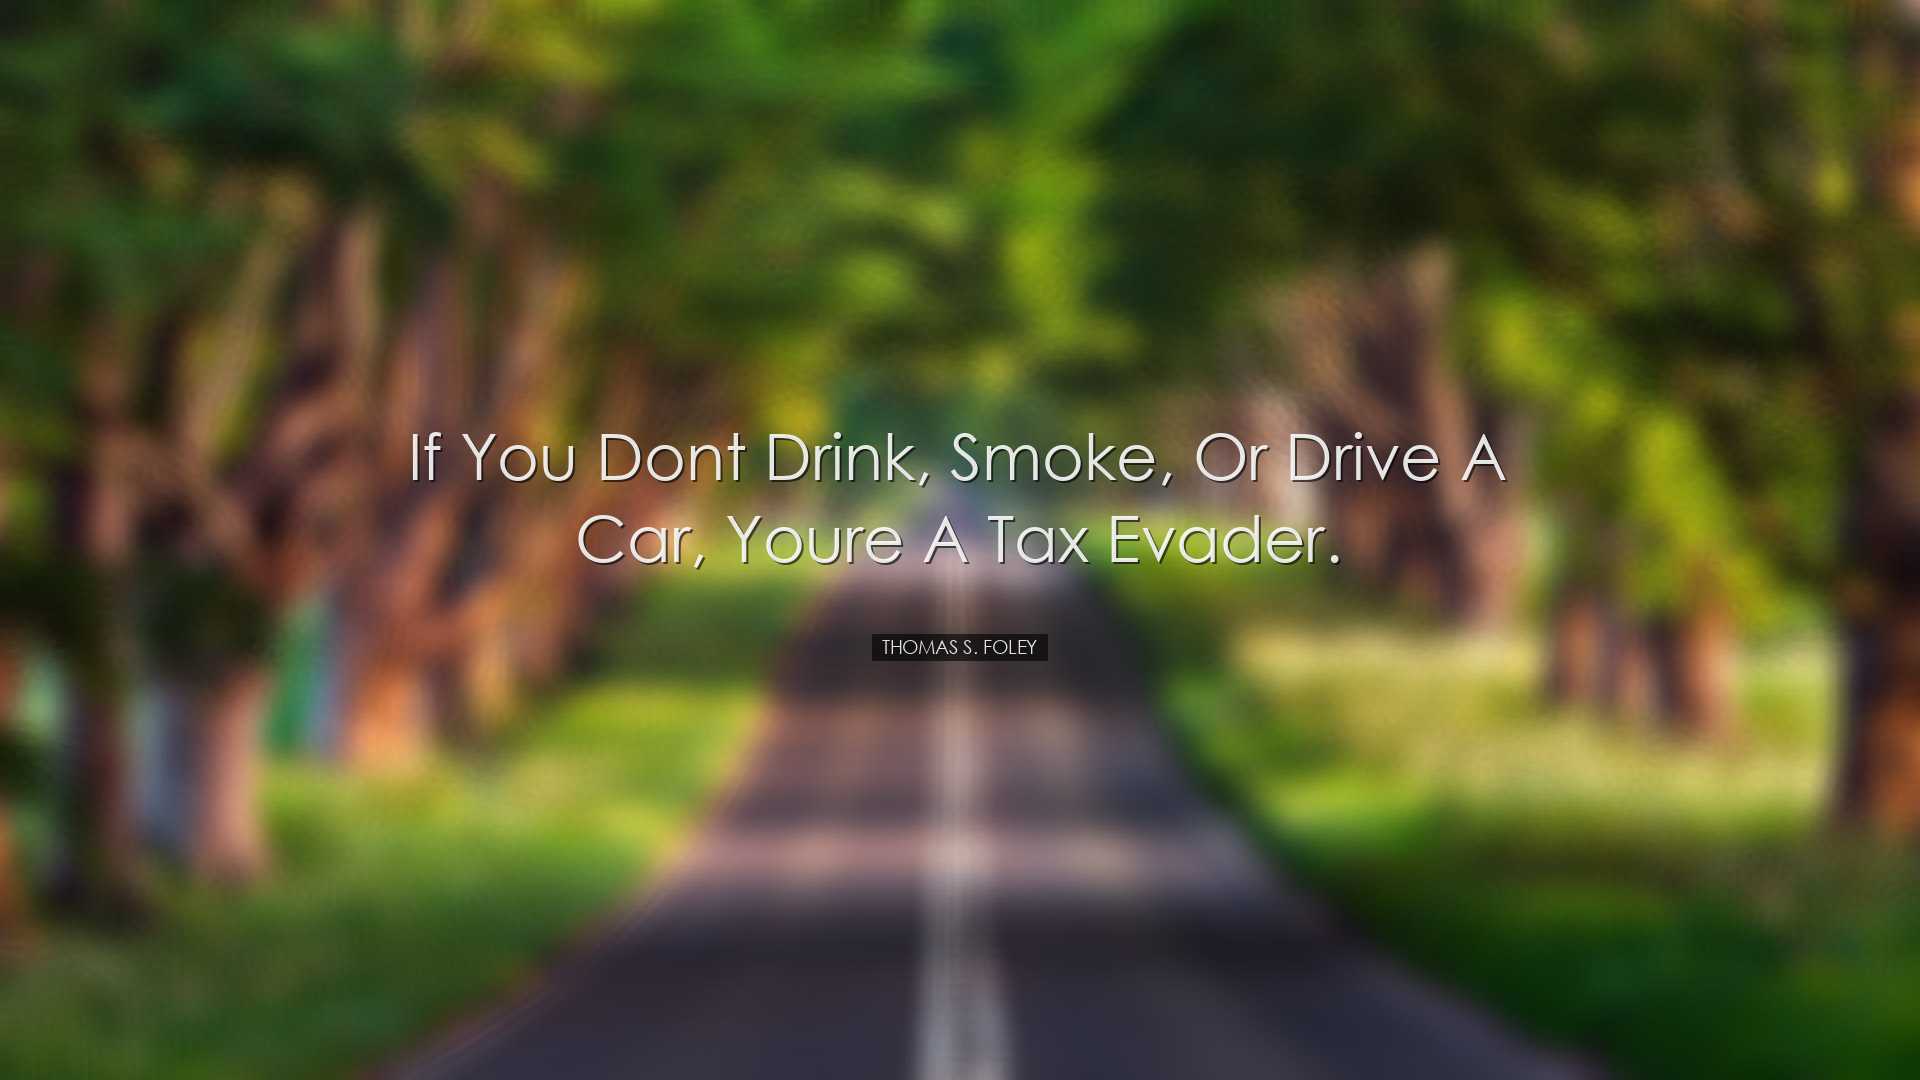 If you dont drink, smoke, or drive a car, youre a tax evader. - Th